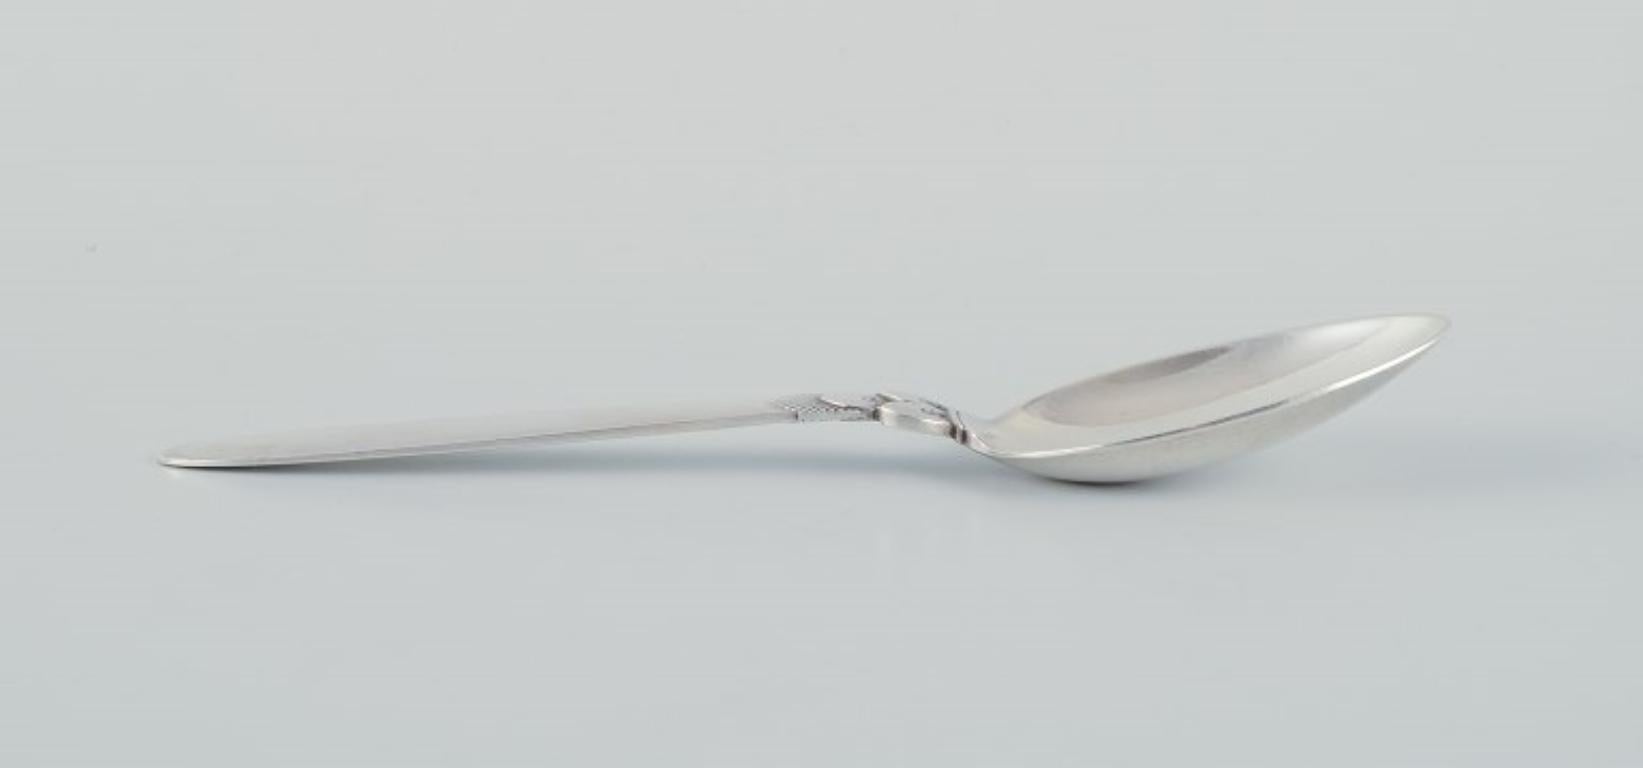 Georg Jensen, Kaktus, a set of twelve sterling silver dessert spoons.
Stamped with the post 1944 hallmark.
In excellent condition.
Dimensions: L 16.9 cm.



